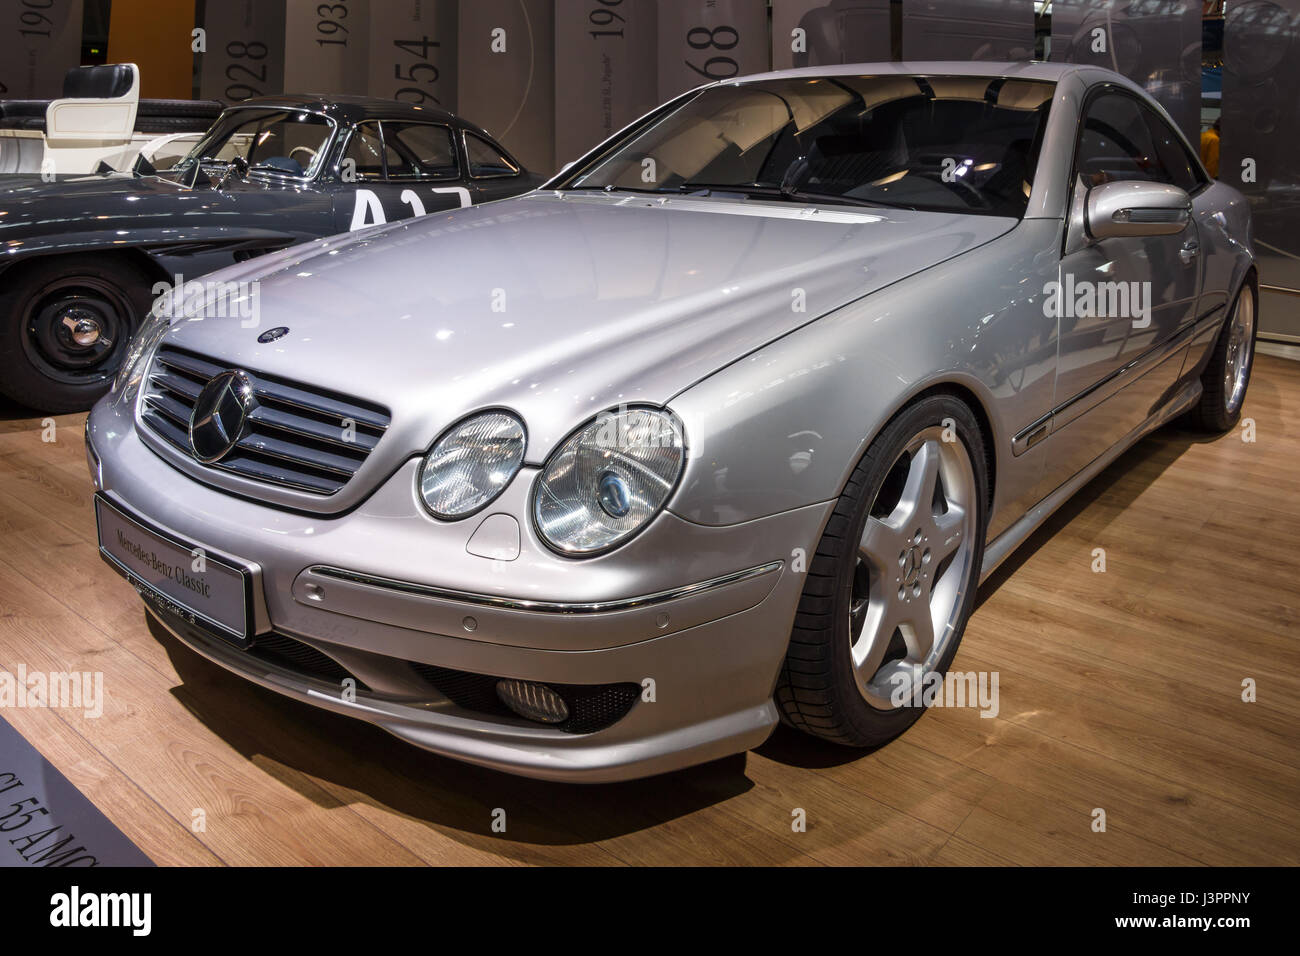 STUTTGART, GERMANY - MARCH 03, 2017: Large luxury grand tourer car Mercedes-Benz CL 55 AMG 'F1 Limited Edition', (C215), 2001. Europe's greatest classic car exhibition 'RETRO CLASSICS' Stock Photo